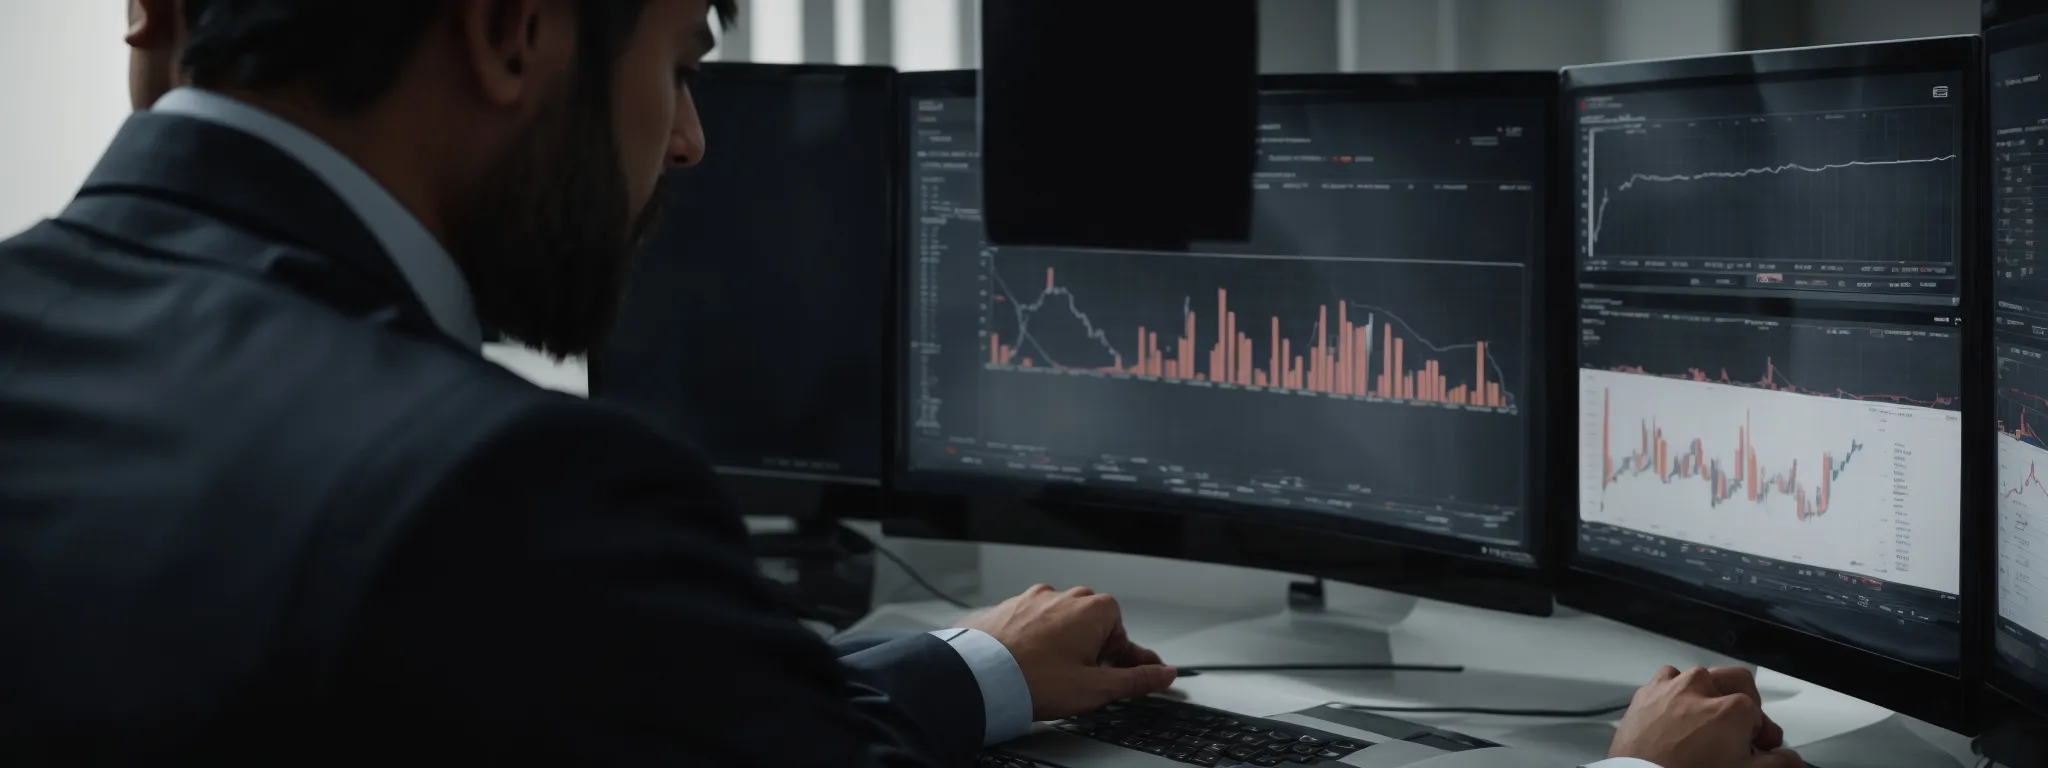 a business person analyzing graphs and charts on a computer screen that show both financial and seo performance data.